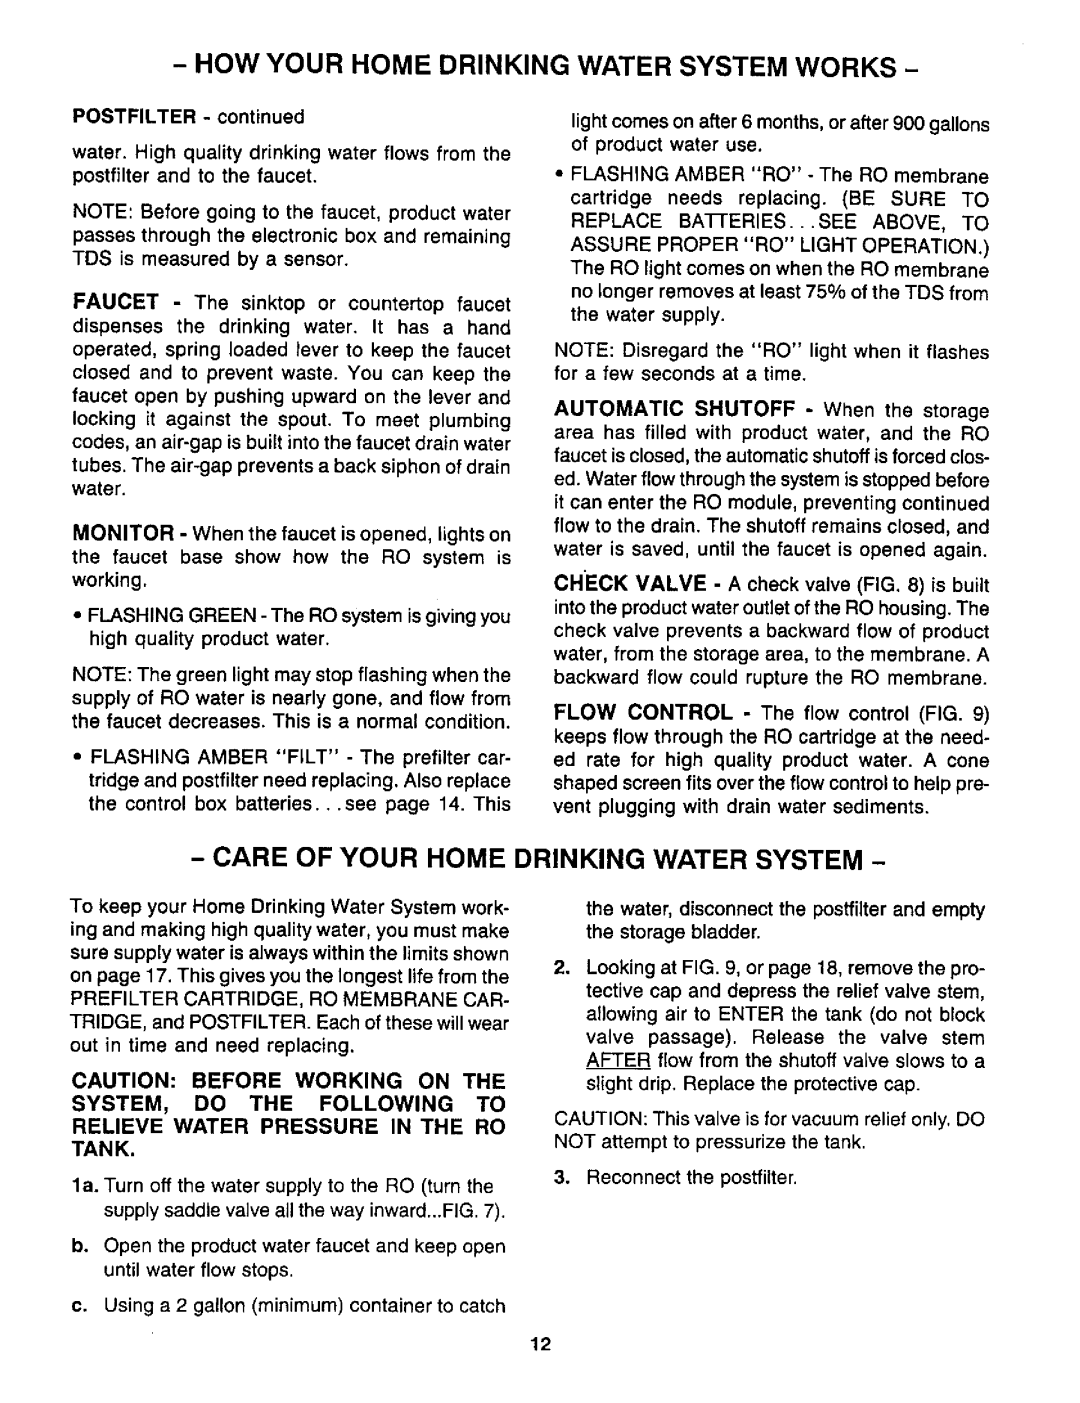 Sears RO 2000 manual Care Of Your Home Drinking Water System, Caution Before Working On The System, Do The Following To 